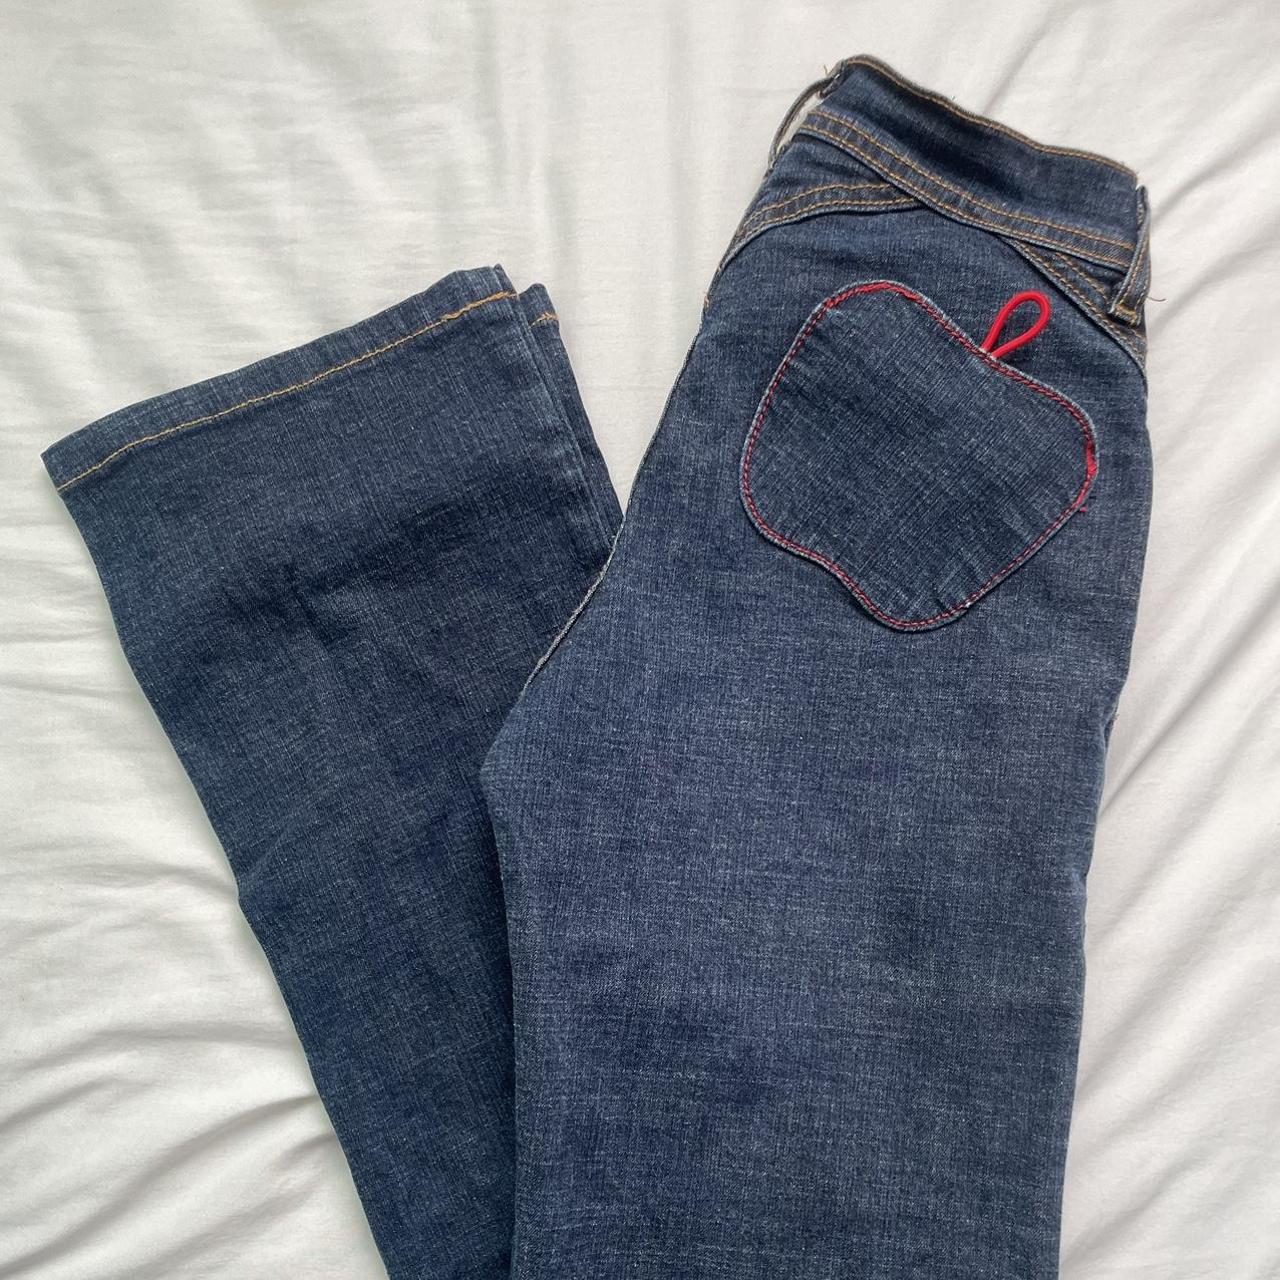 Apple Bottoms Women's Navy and Red Jeans (3)